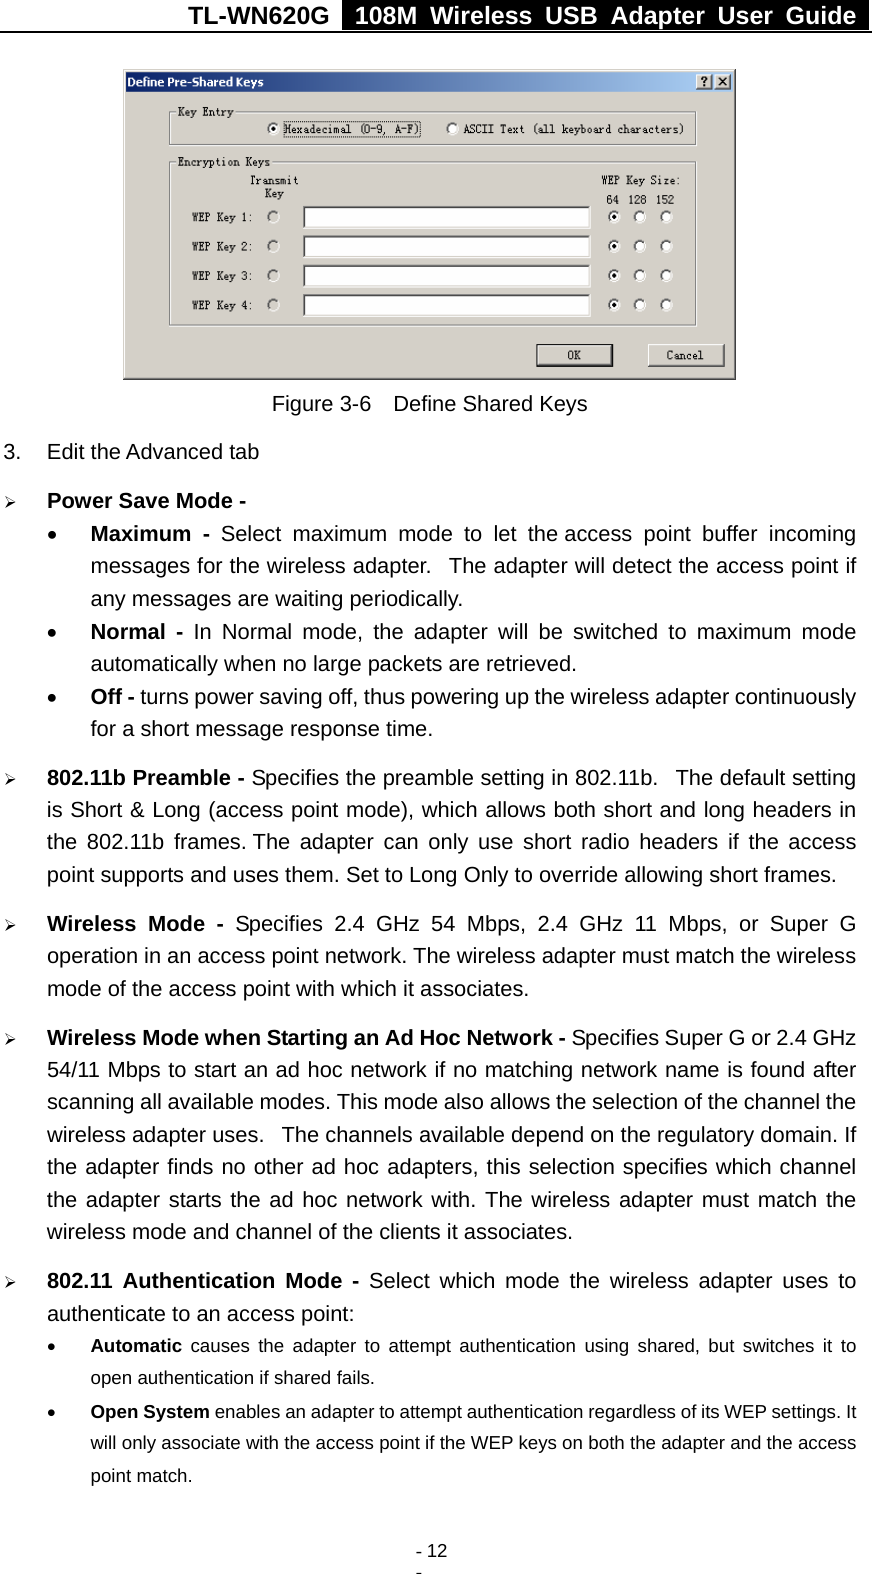 TL-WN620G   108M Wireless USB Adapter User Guide    - 12 -  Figure 3-6    Define Shared Keys 3.  Edit the Advanced tab ¾ Power Save Mode - • Maximum - Select maximum mode to let the access point buffer incoming messages for the wireless adapter.   The adapter will detect the access point if any messages are waiting periodically. • Normal - In Normal mode, the adapter will be switched to maximum mode automatically when no large packets are retrieved. • Off - turns power saving off, thus powering up the wireless adapter continuously for a short message response time. ¾ 802.11b Preamble - Specifies the preamble setting in 802.11b.   The default setting is Short &amp; Long (access point mode), which allows both short and long headers in the 802.11b frames. The adapter can only use short radio headers if the access point supports and uses them. Set to Long Only to override allowing short frames. ¾ Wireless Mode - Specifies 2.4 GHz 54 Mbps, 2.4 GHz 11 Mbps, or Super G operation in an access point network. The wireless adapter must match the wireless mode of the access point with which it associates. ¾ Wireless Mode when Starting an Ad Hoc Network - Specifies Super G or 2.4 GHz 54/11 Mbps to start an ad hoc network if no matching network name is found after scanning all available modes. This mode also allows the selection of the channel the wireless adapter uses.   The channels available depend on the regulatory domain. If the adapter finds no other ad hoc adapters, this selection specifies which channel the adapter starts the ad hoc network with. The wireless adapter must match the wireless mode and channel of the clients it associates. ¾ 802.11 Authentication Mode - Select which mode the wireless adapter uses to authenticate to an access point: • Automatic causes the adapter to attempt authentication using shared, but switches it to open authentication if shared fails. • Open System enables an adapter to attempt authentication regardless of its WEP settings. It will only associate with the access point if the WEP keys on both the adapter and the access point match. 